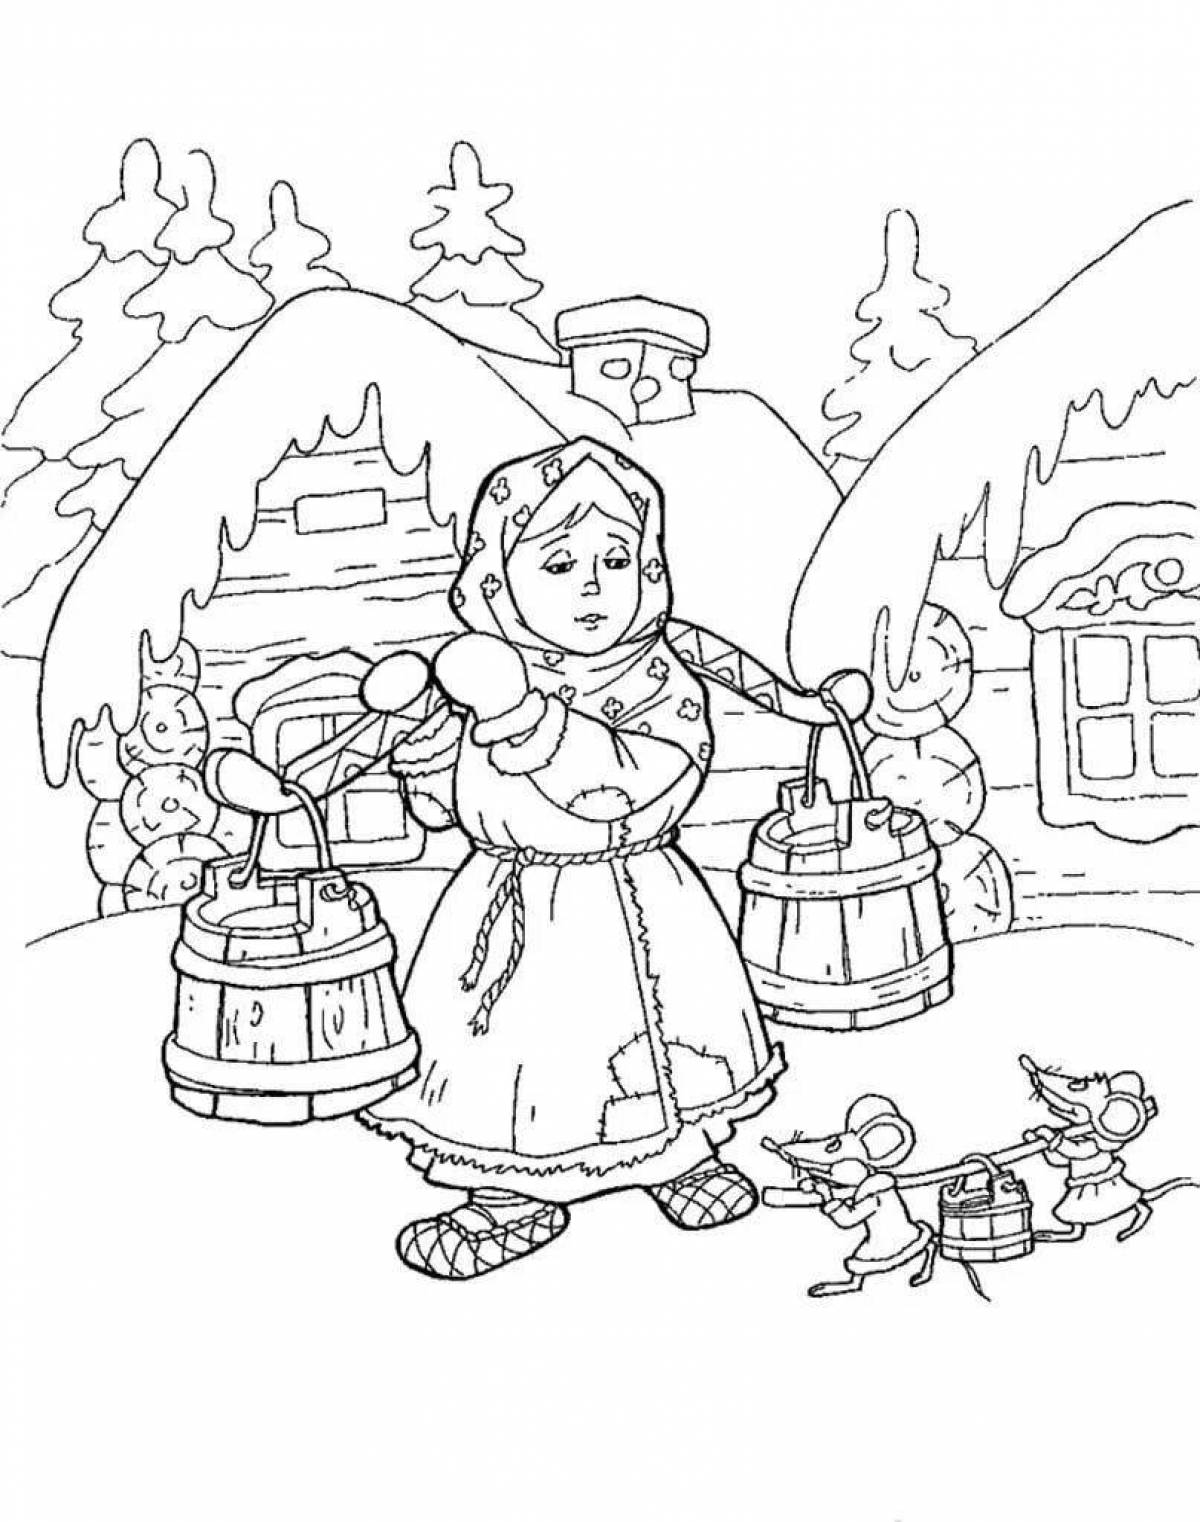 Sublime coloring page odoevsky frost ivanovich